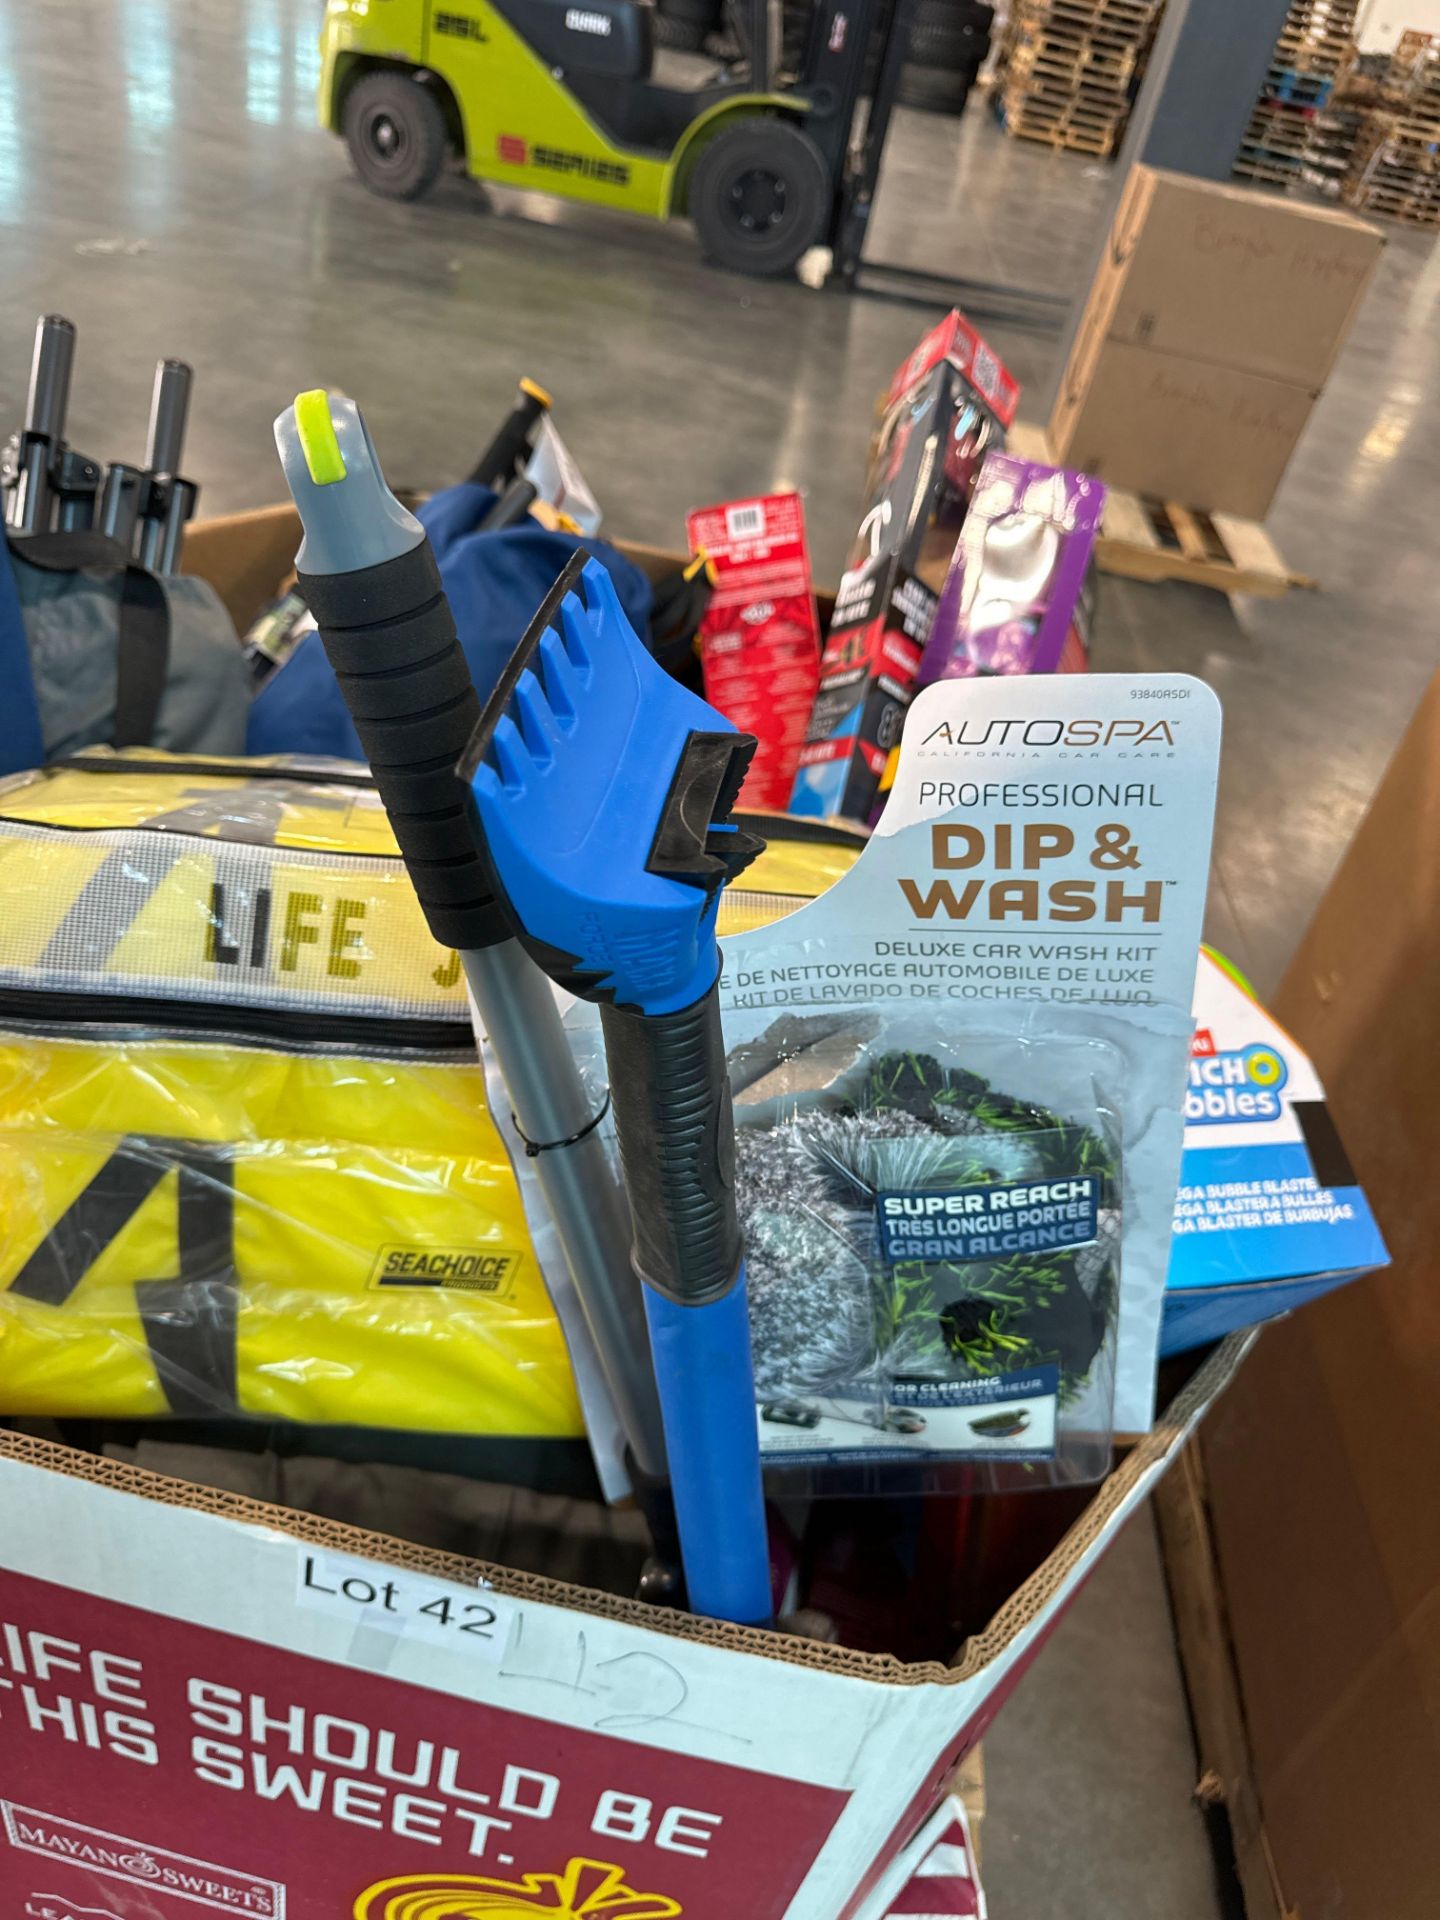 Kites, life jackets, car wash accessories, chairs, hiking poles, golf gloves and more - Image 3 of 10